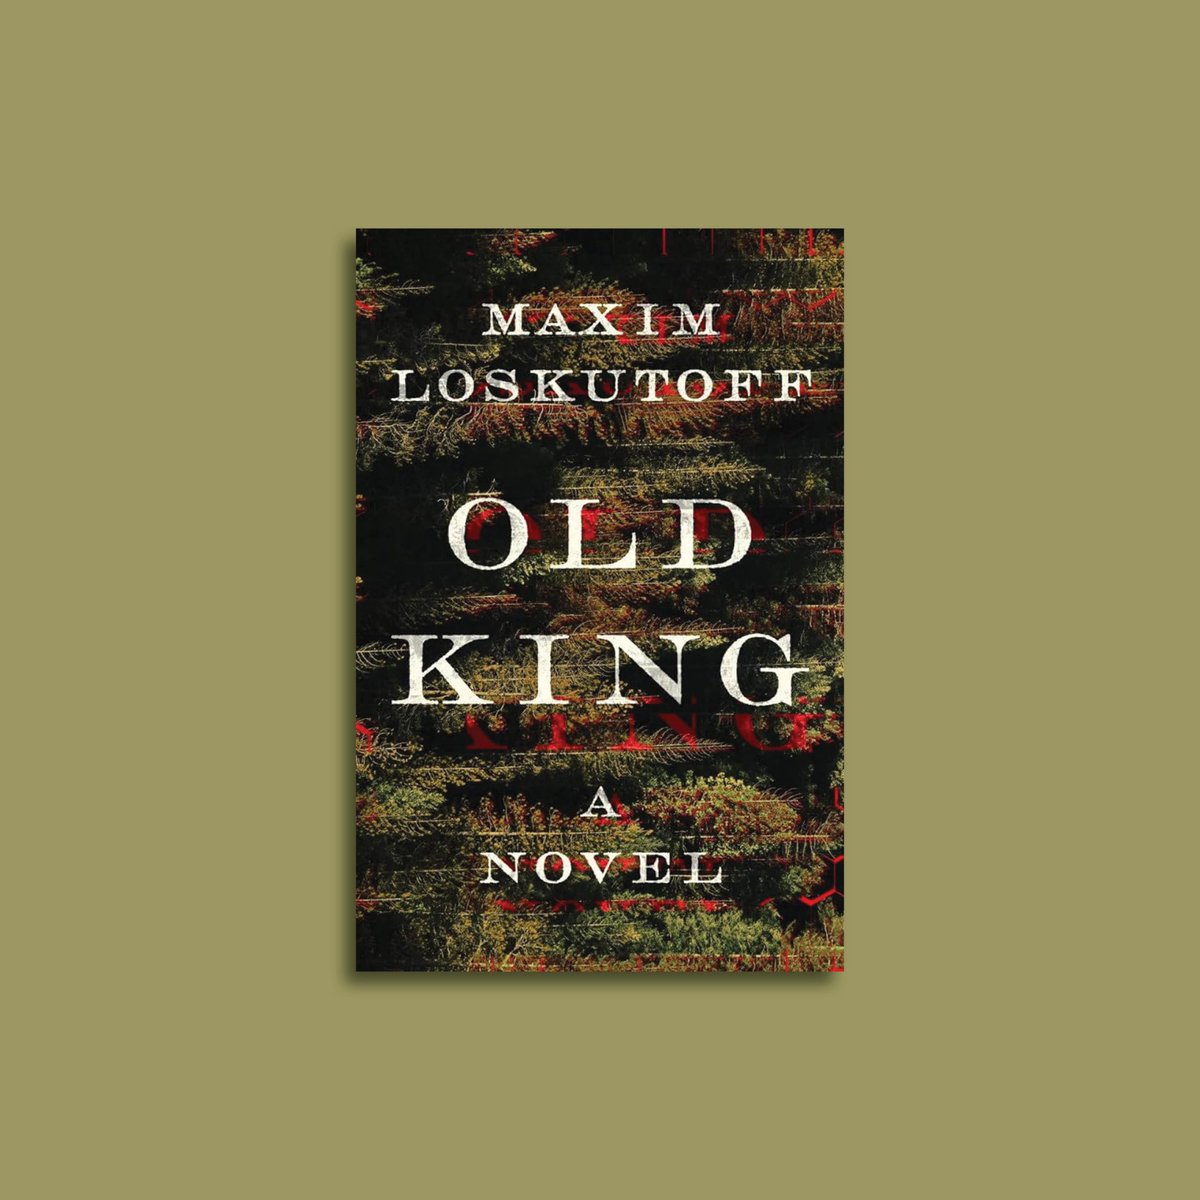 “Every significant figure in Old King does connect in a sense; they all share an anxiety, a sense of loss regarding what’s coming down the road.” John Zerzan reviews a novel with a character reminiscent of John Updike’s Harry “Rabbit” Angstrom. worldliteraturetoday.org/2024/may/old-k…